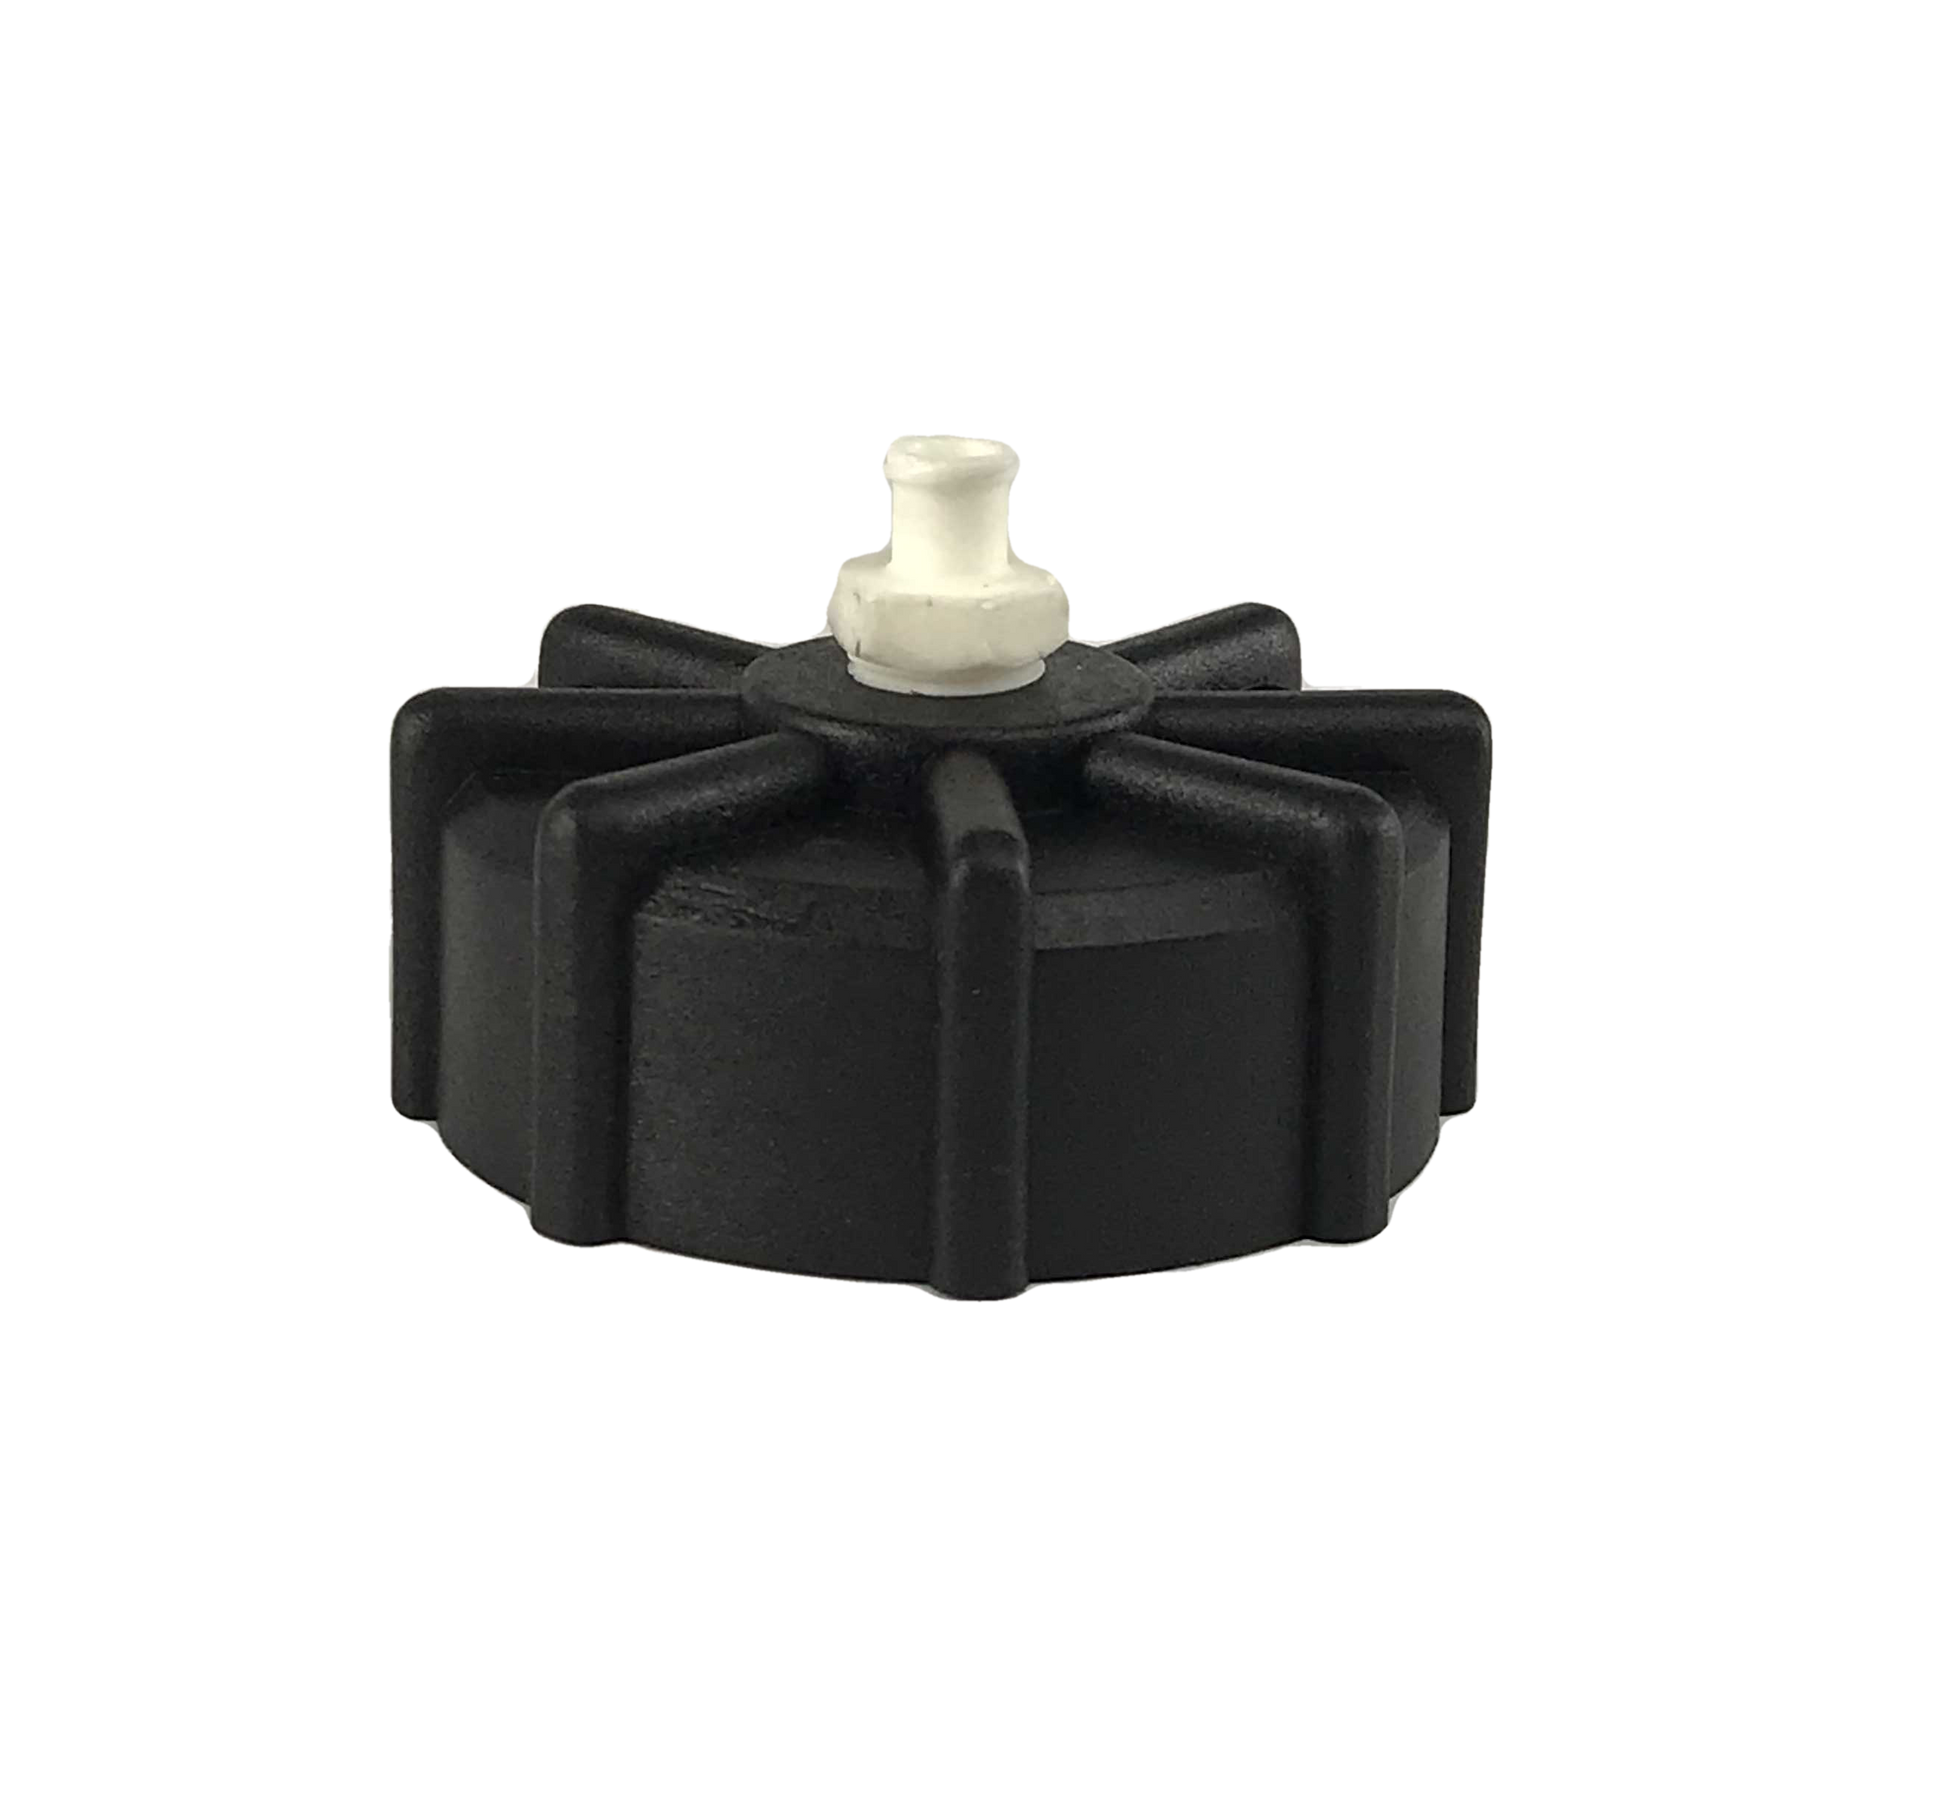 BC-06 Master Cylinder Cap Adapter. It is a low-pressure adapter designed for 15-17 psi. The adapter is made of durable plastic and has a numbered cap for easy identification. It is compatible with a variety of European cars, GM, and some Mazda vehicles.